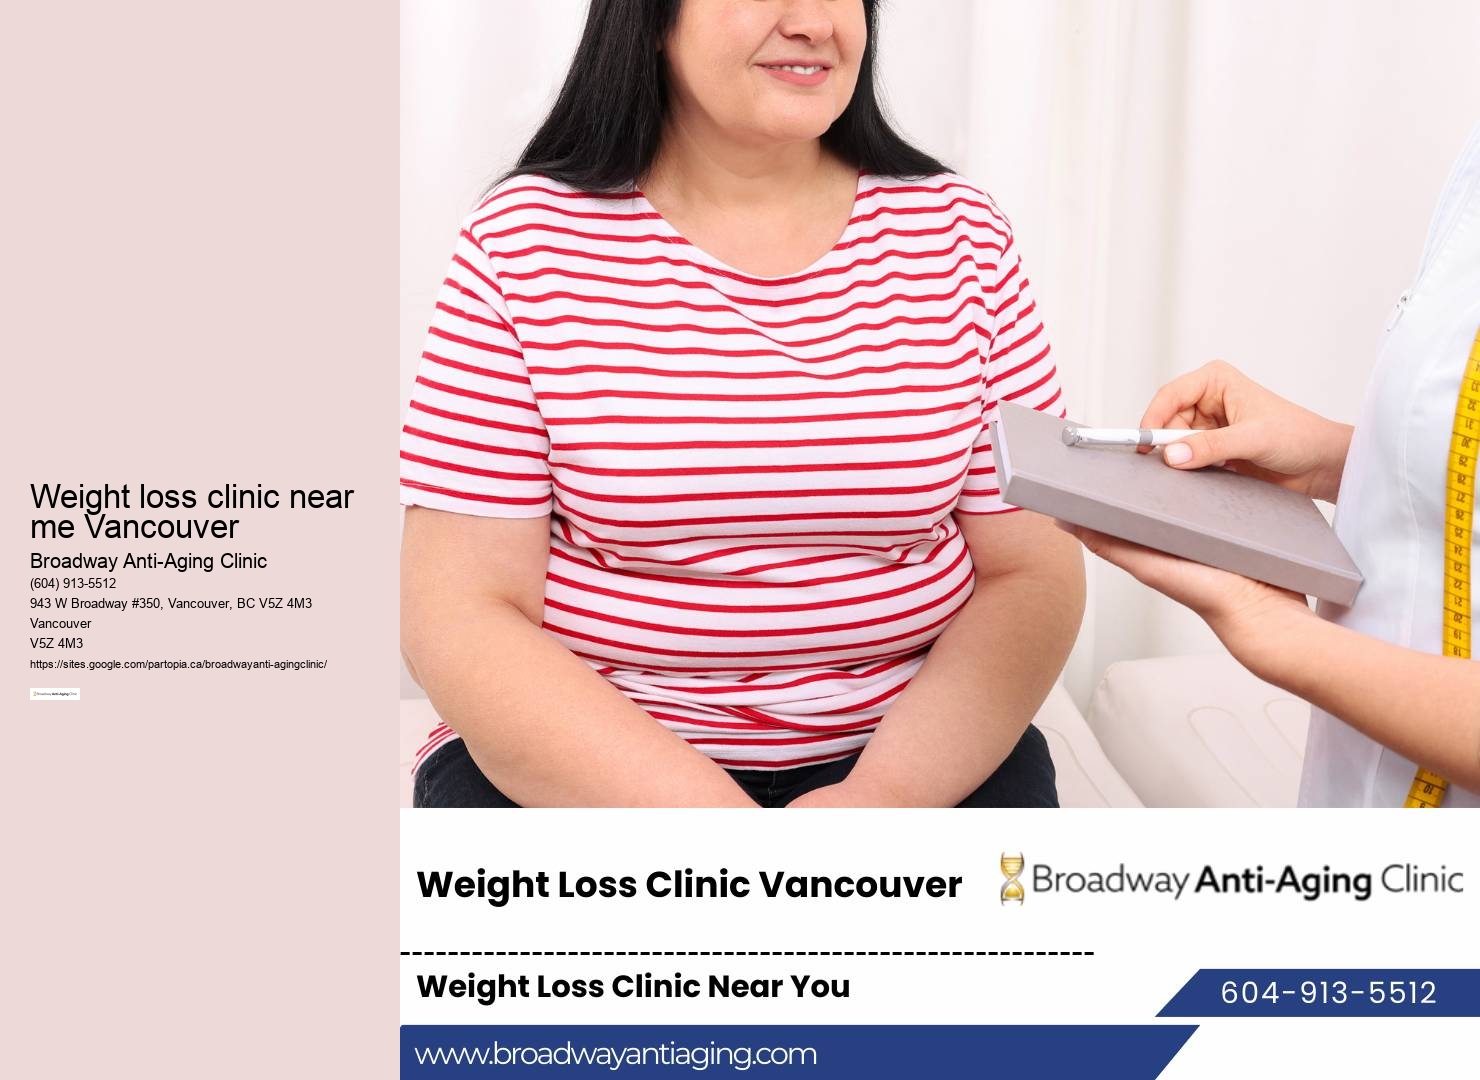 Weight loss clinic costs Canada